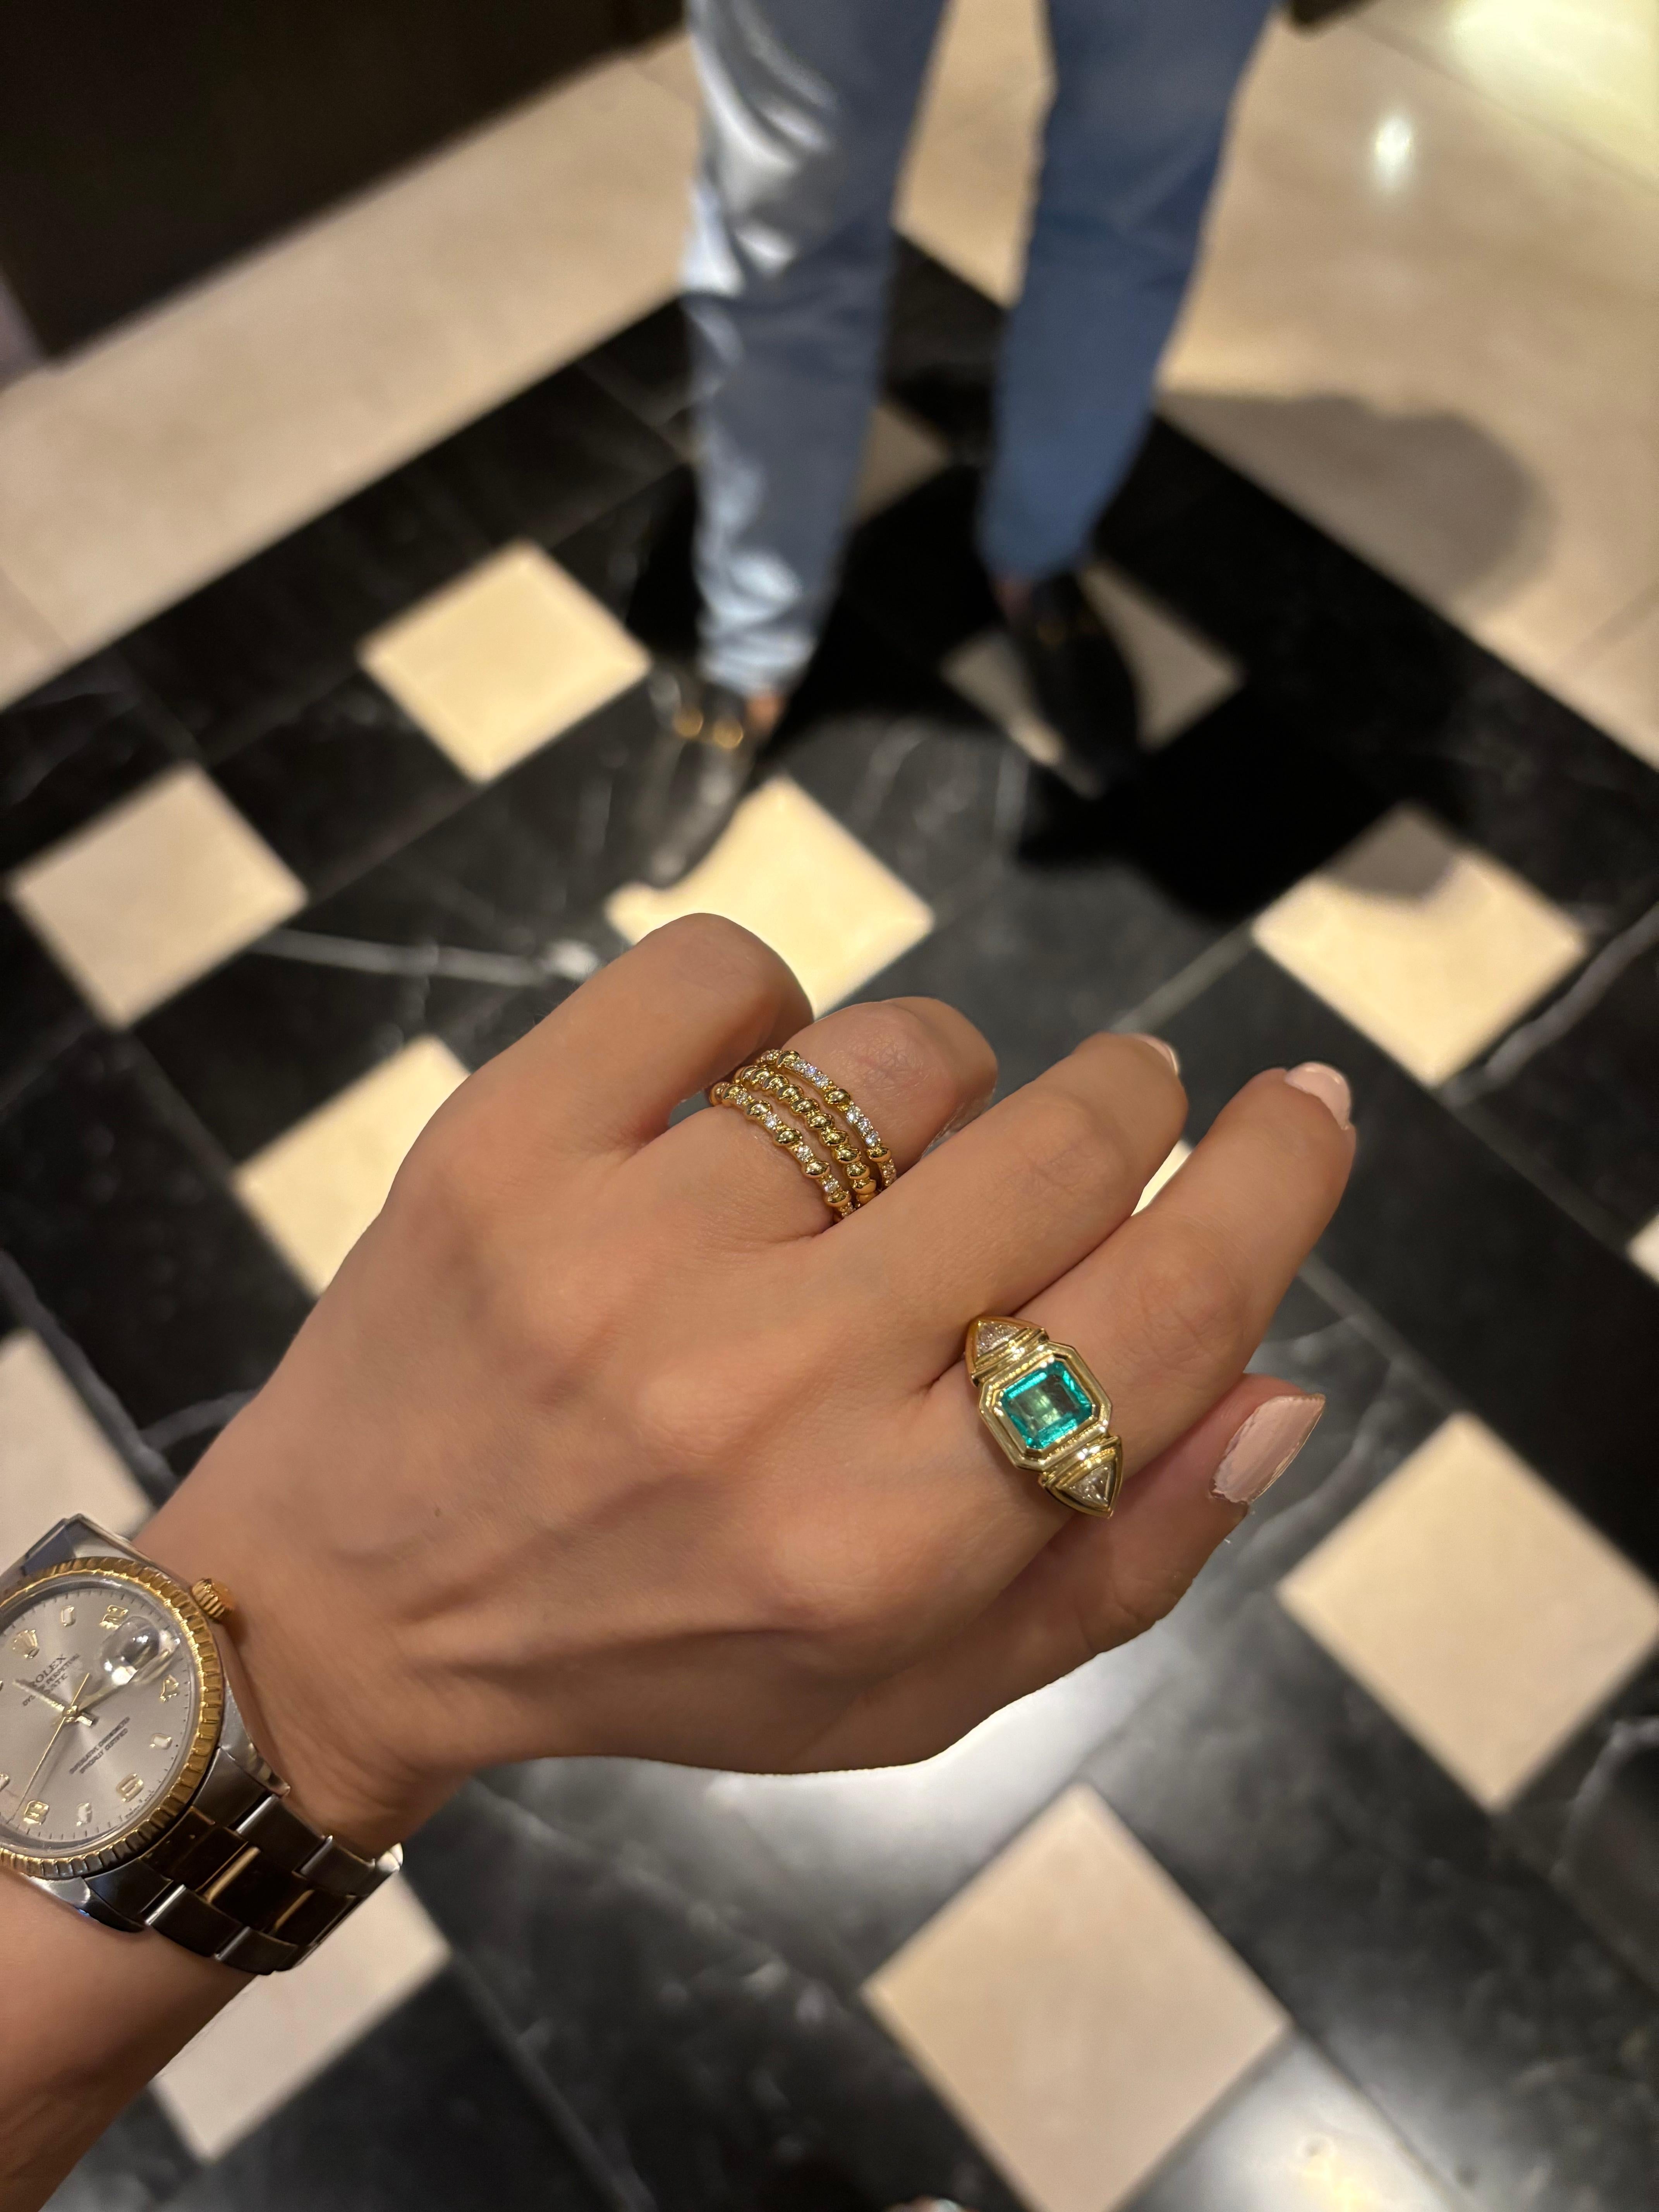 This exquisite 18-karat gold ring is centered with a natural emerald and paired with two natural trillion-cut diamonds, in a geometric stepped setting. 

The ring weighs just over 6grams of gold, giving it a luxurious feel. It's three stone design